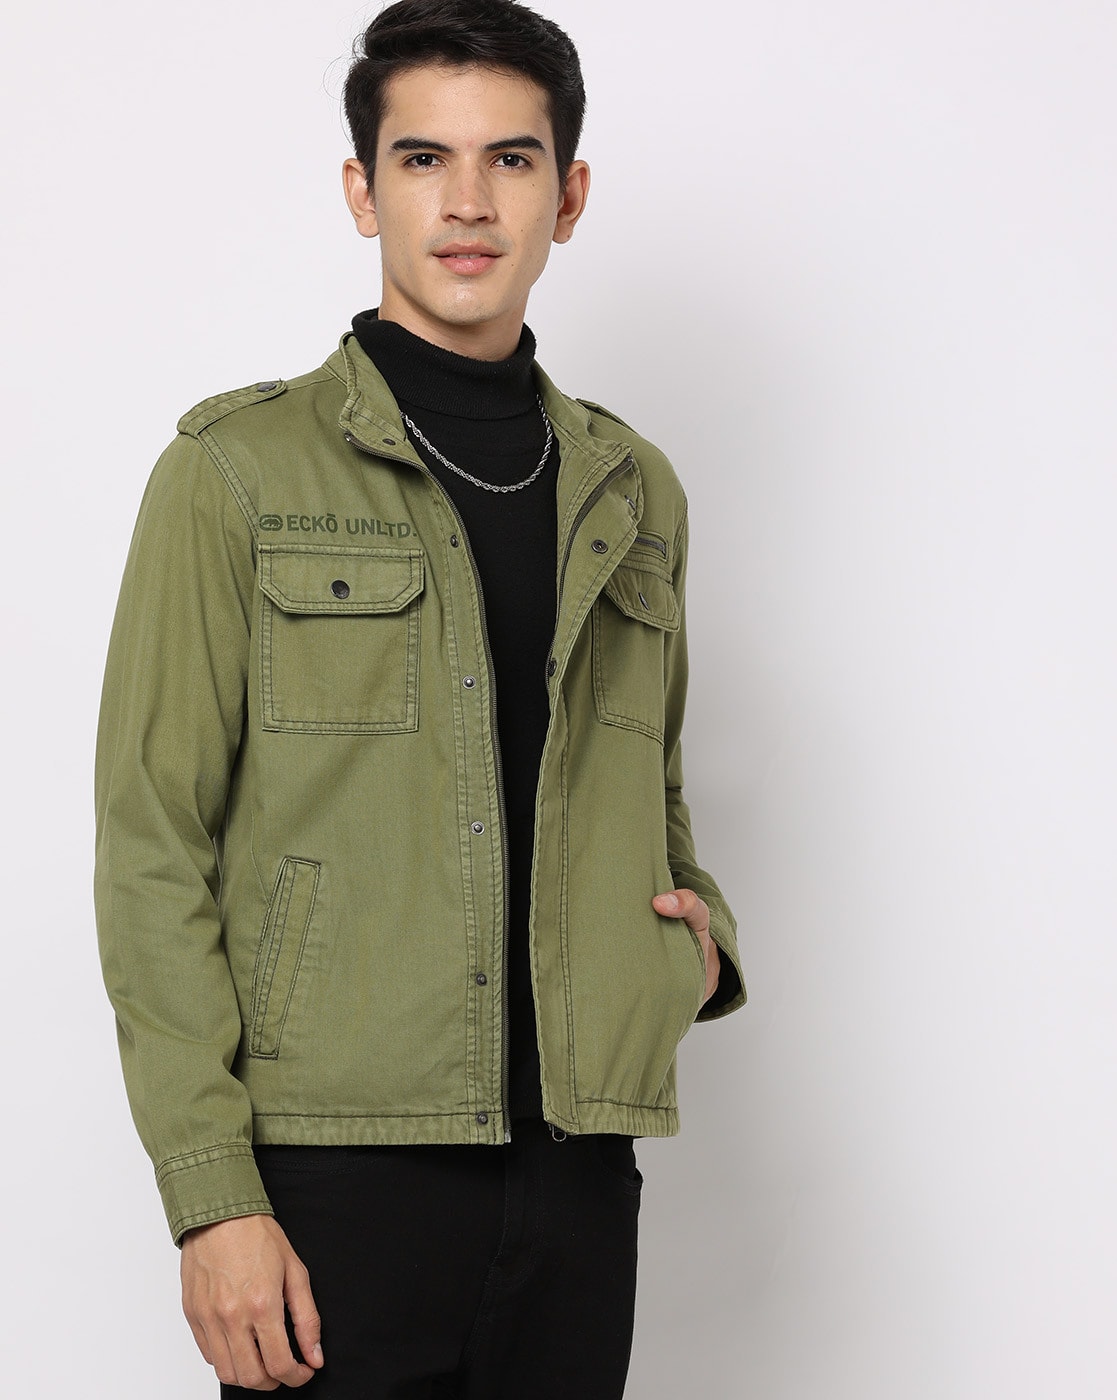 Mens Slim Fit Army Green Just Jeans Mens Jackets For Spring And Autumn  Streetwear Denim Jacket With Hip Hop Bomber Style Style 201127 From Cong03,  $24.86 | DHgate.Com